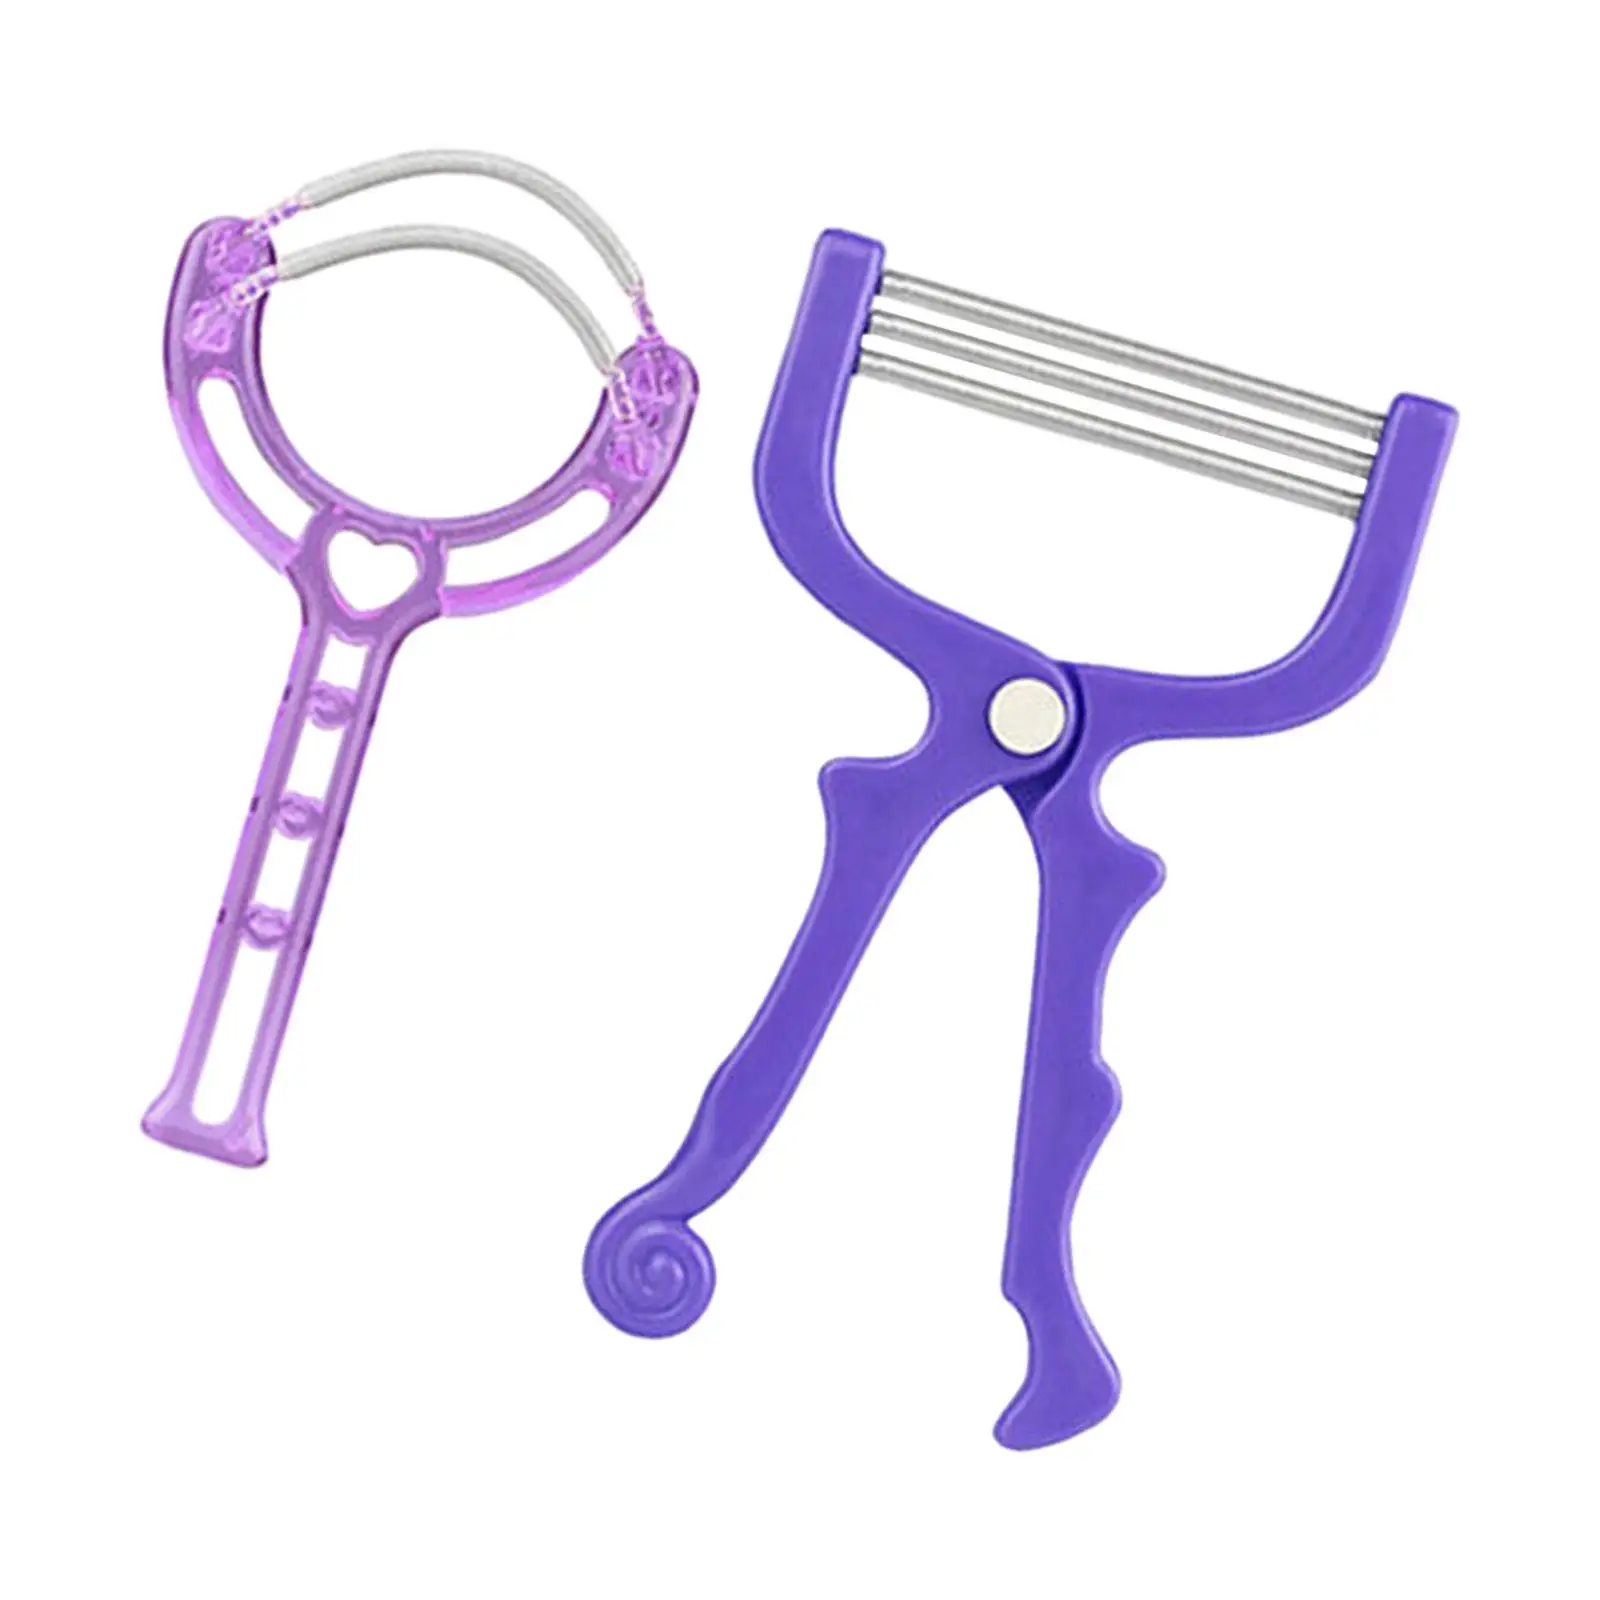 Spring Hair Remover for Removing Beauty Tool Facial Hair Remover for Women Mustache Upper Lip Hair Unsightly Hair Neck Sideburns